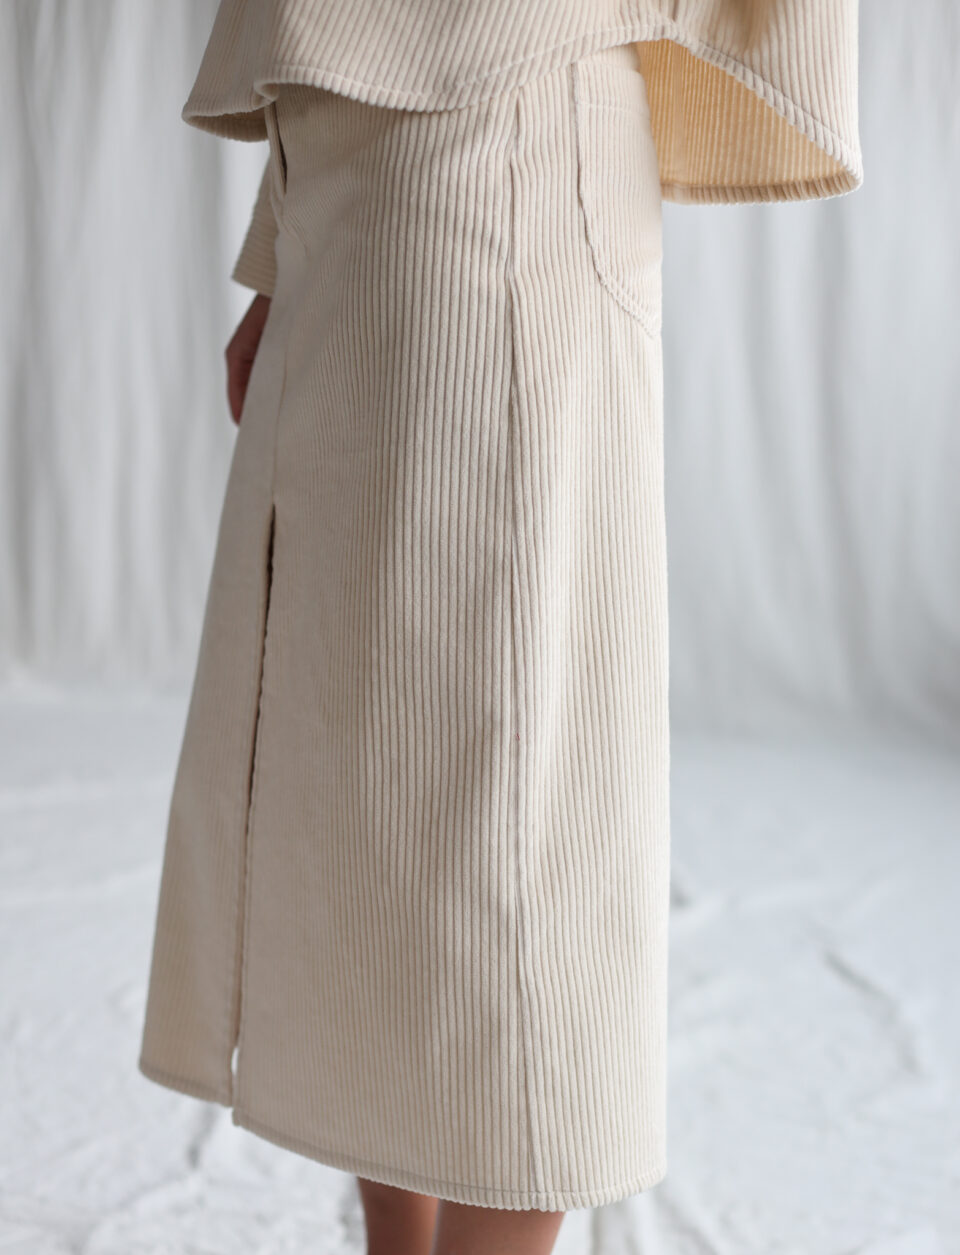 Ivory wide cord pencil skirt | Skirt | Sustainable clothing | OffOn clothing